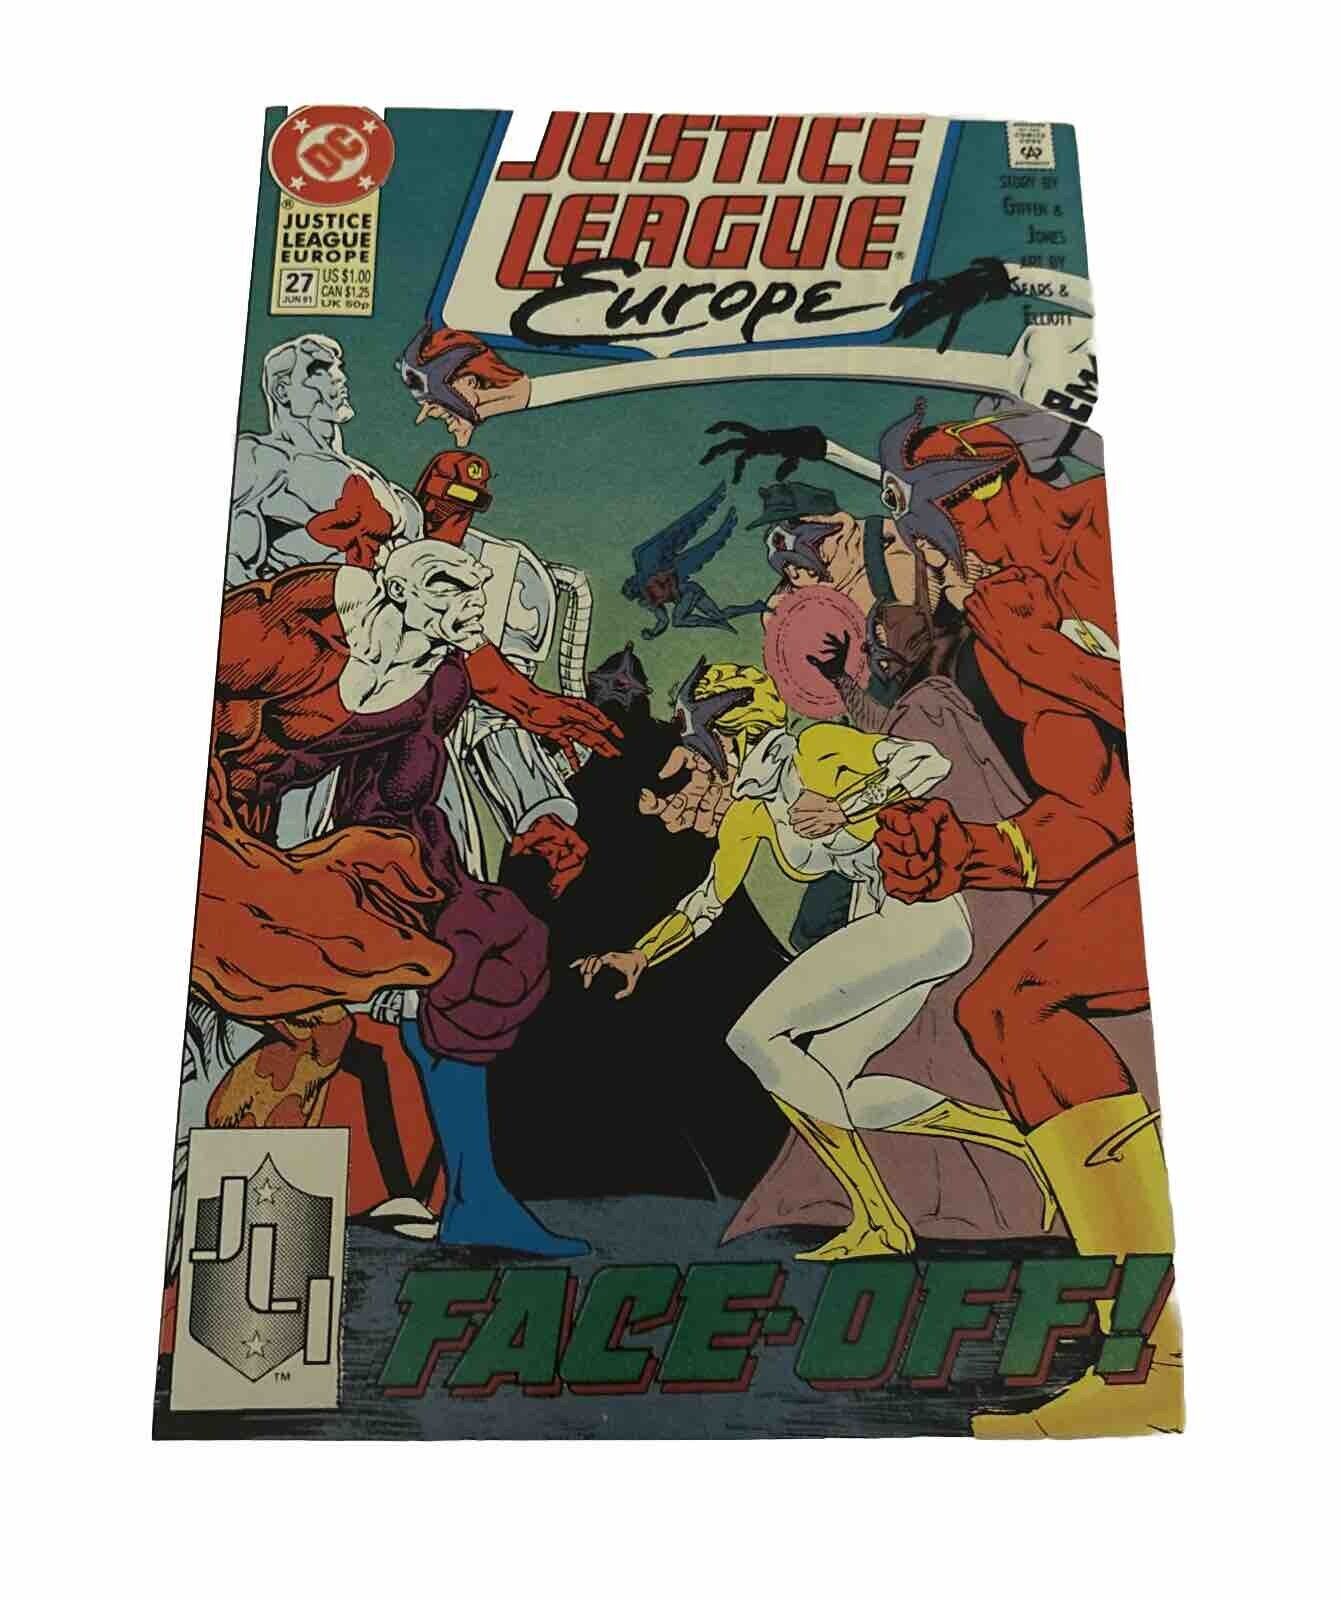 Justice League Europe #27 in Near Mint minus condition. DC comics (box34)